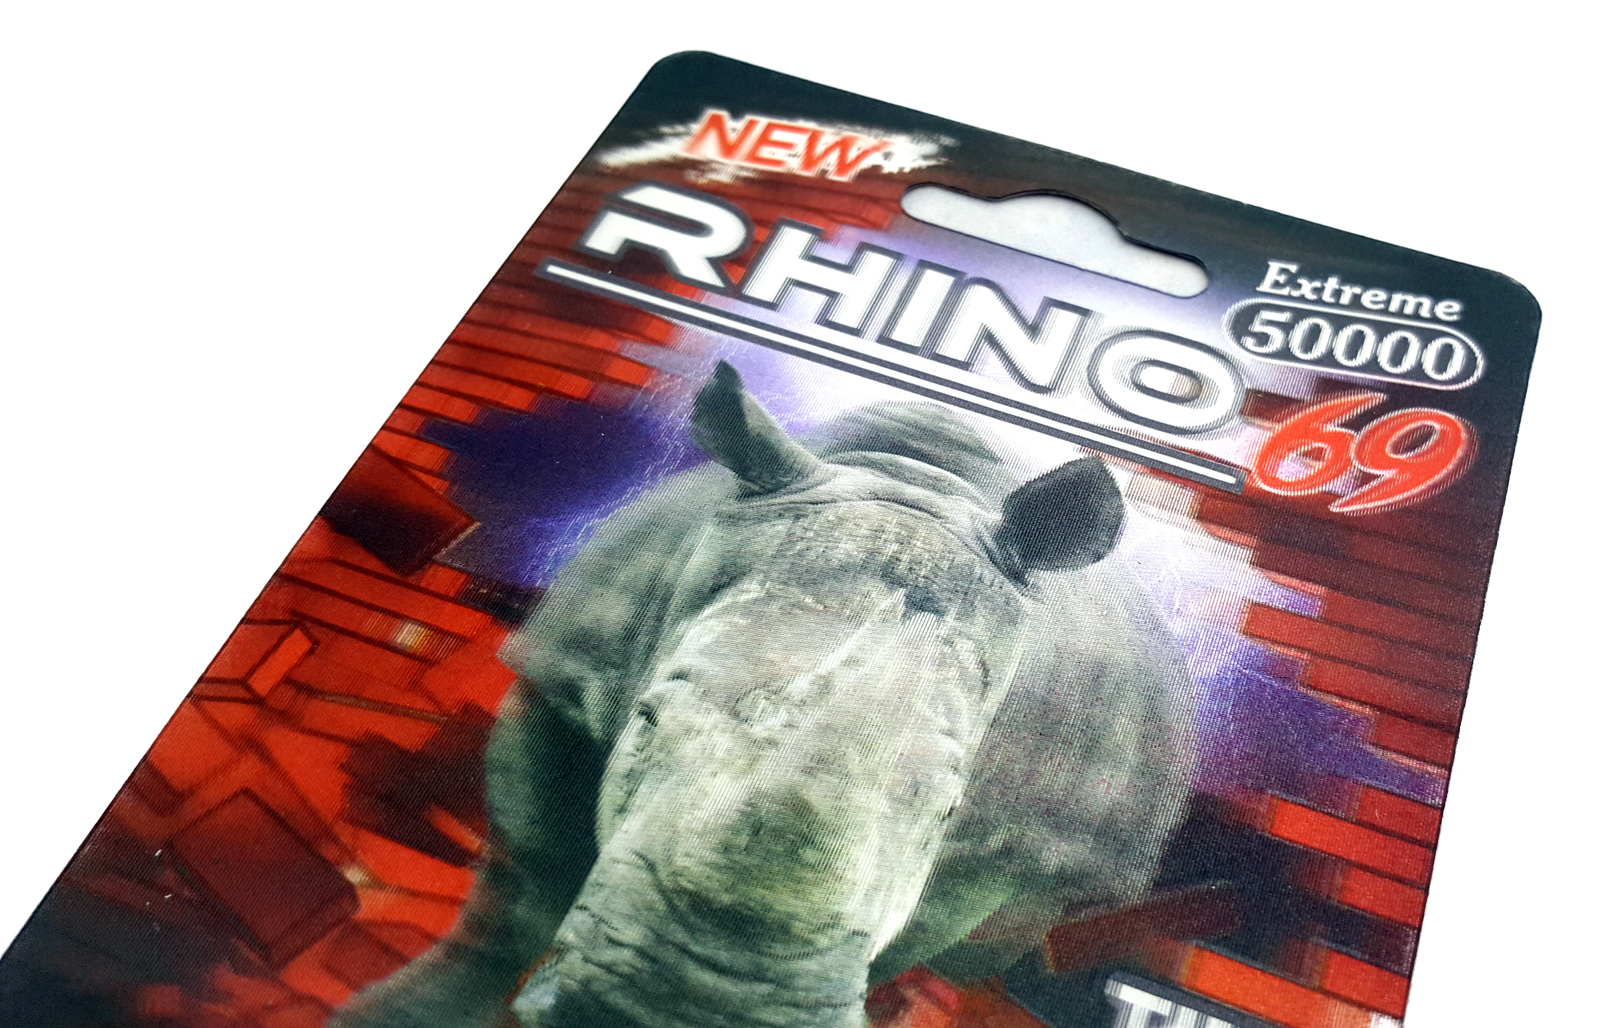 Rhino 69 Extreme 50000 - BEST Male Sexual Performance ...